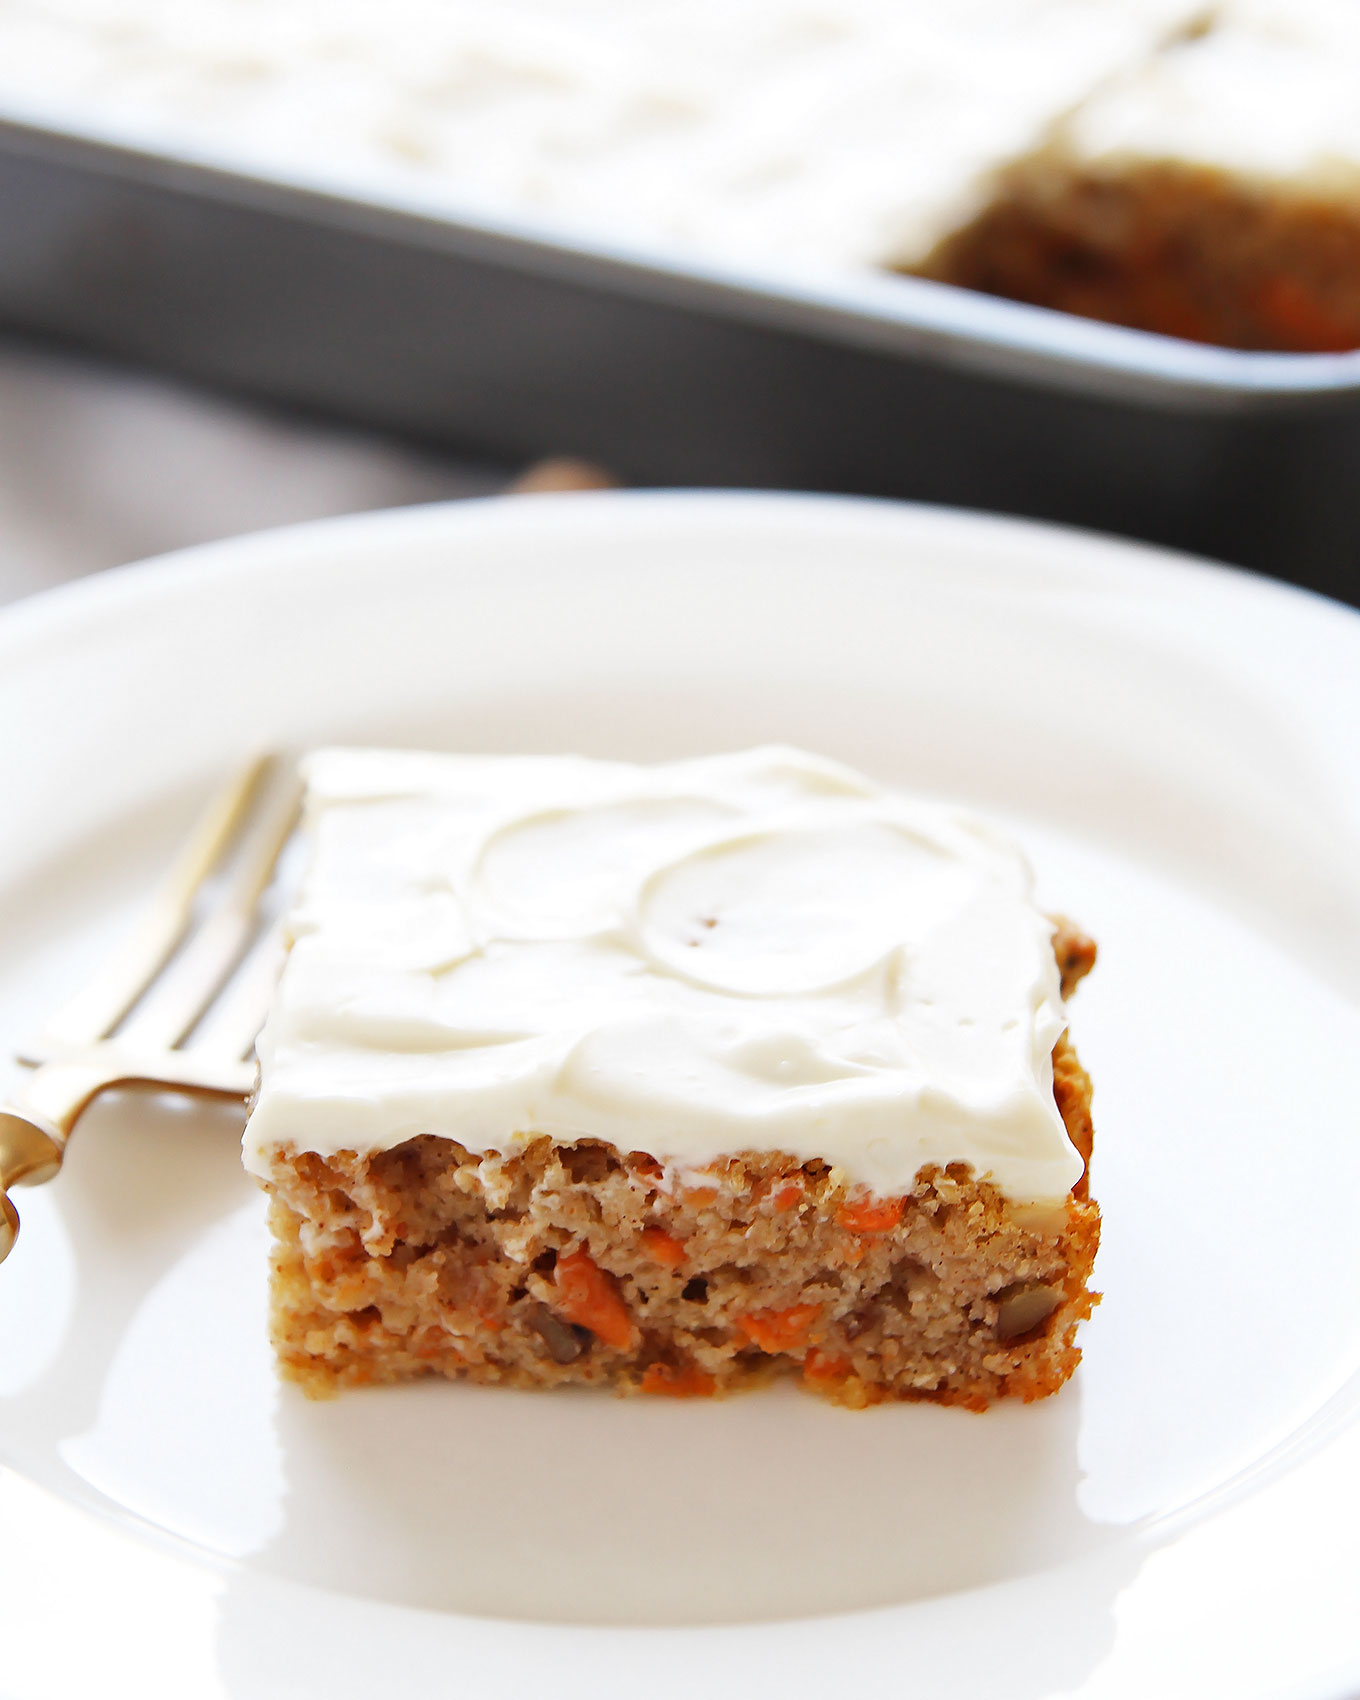 Paleo Carrot Cake with Frosting